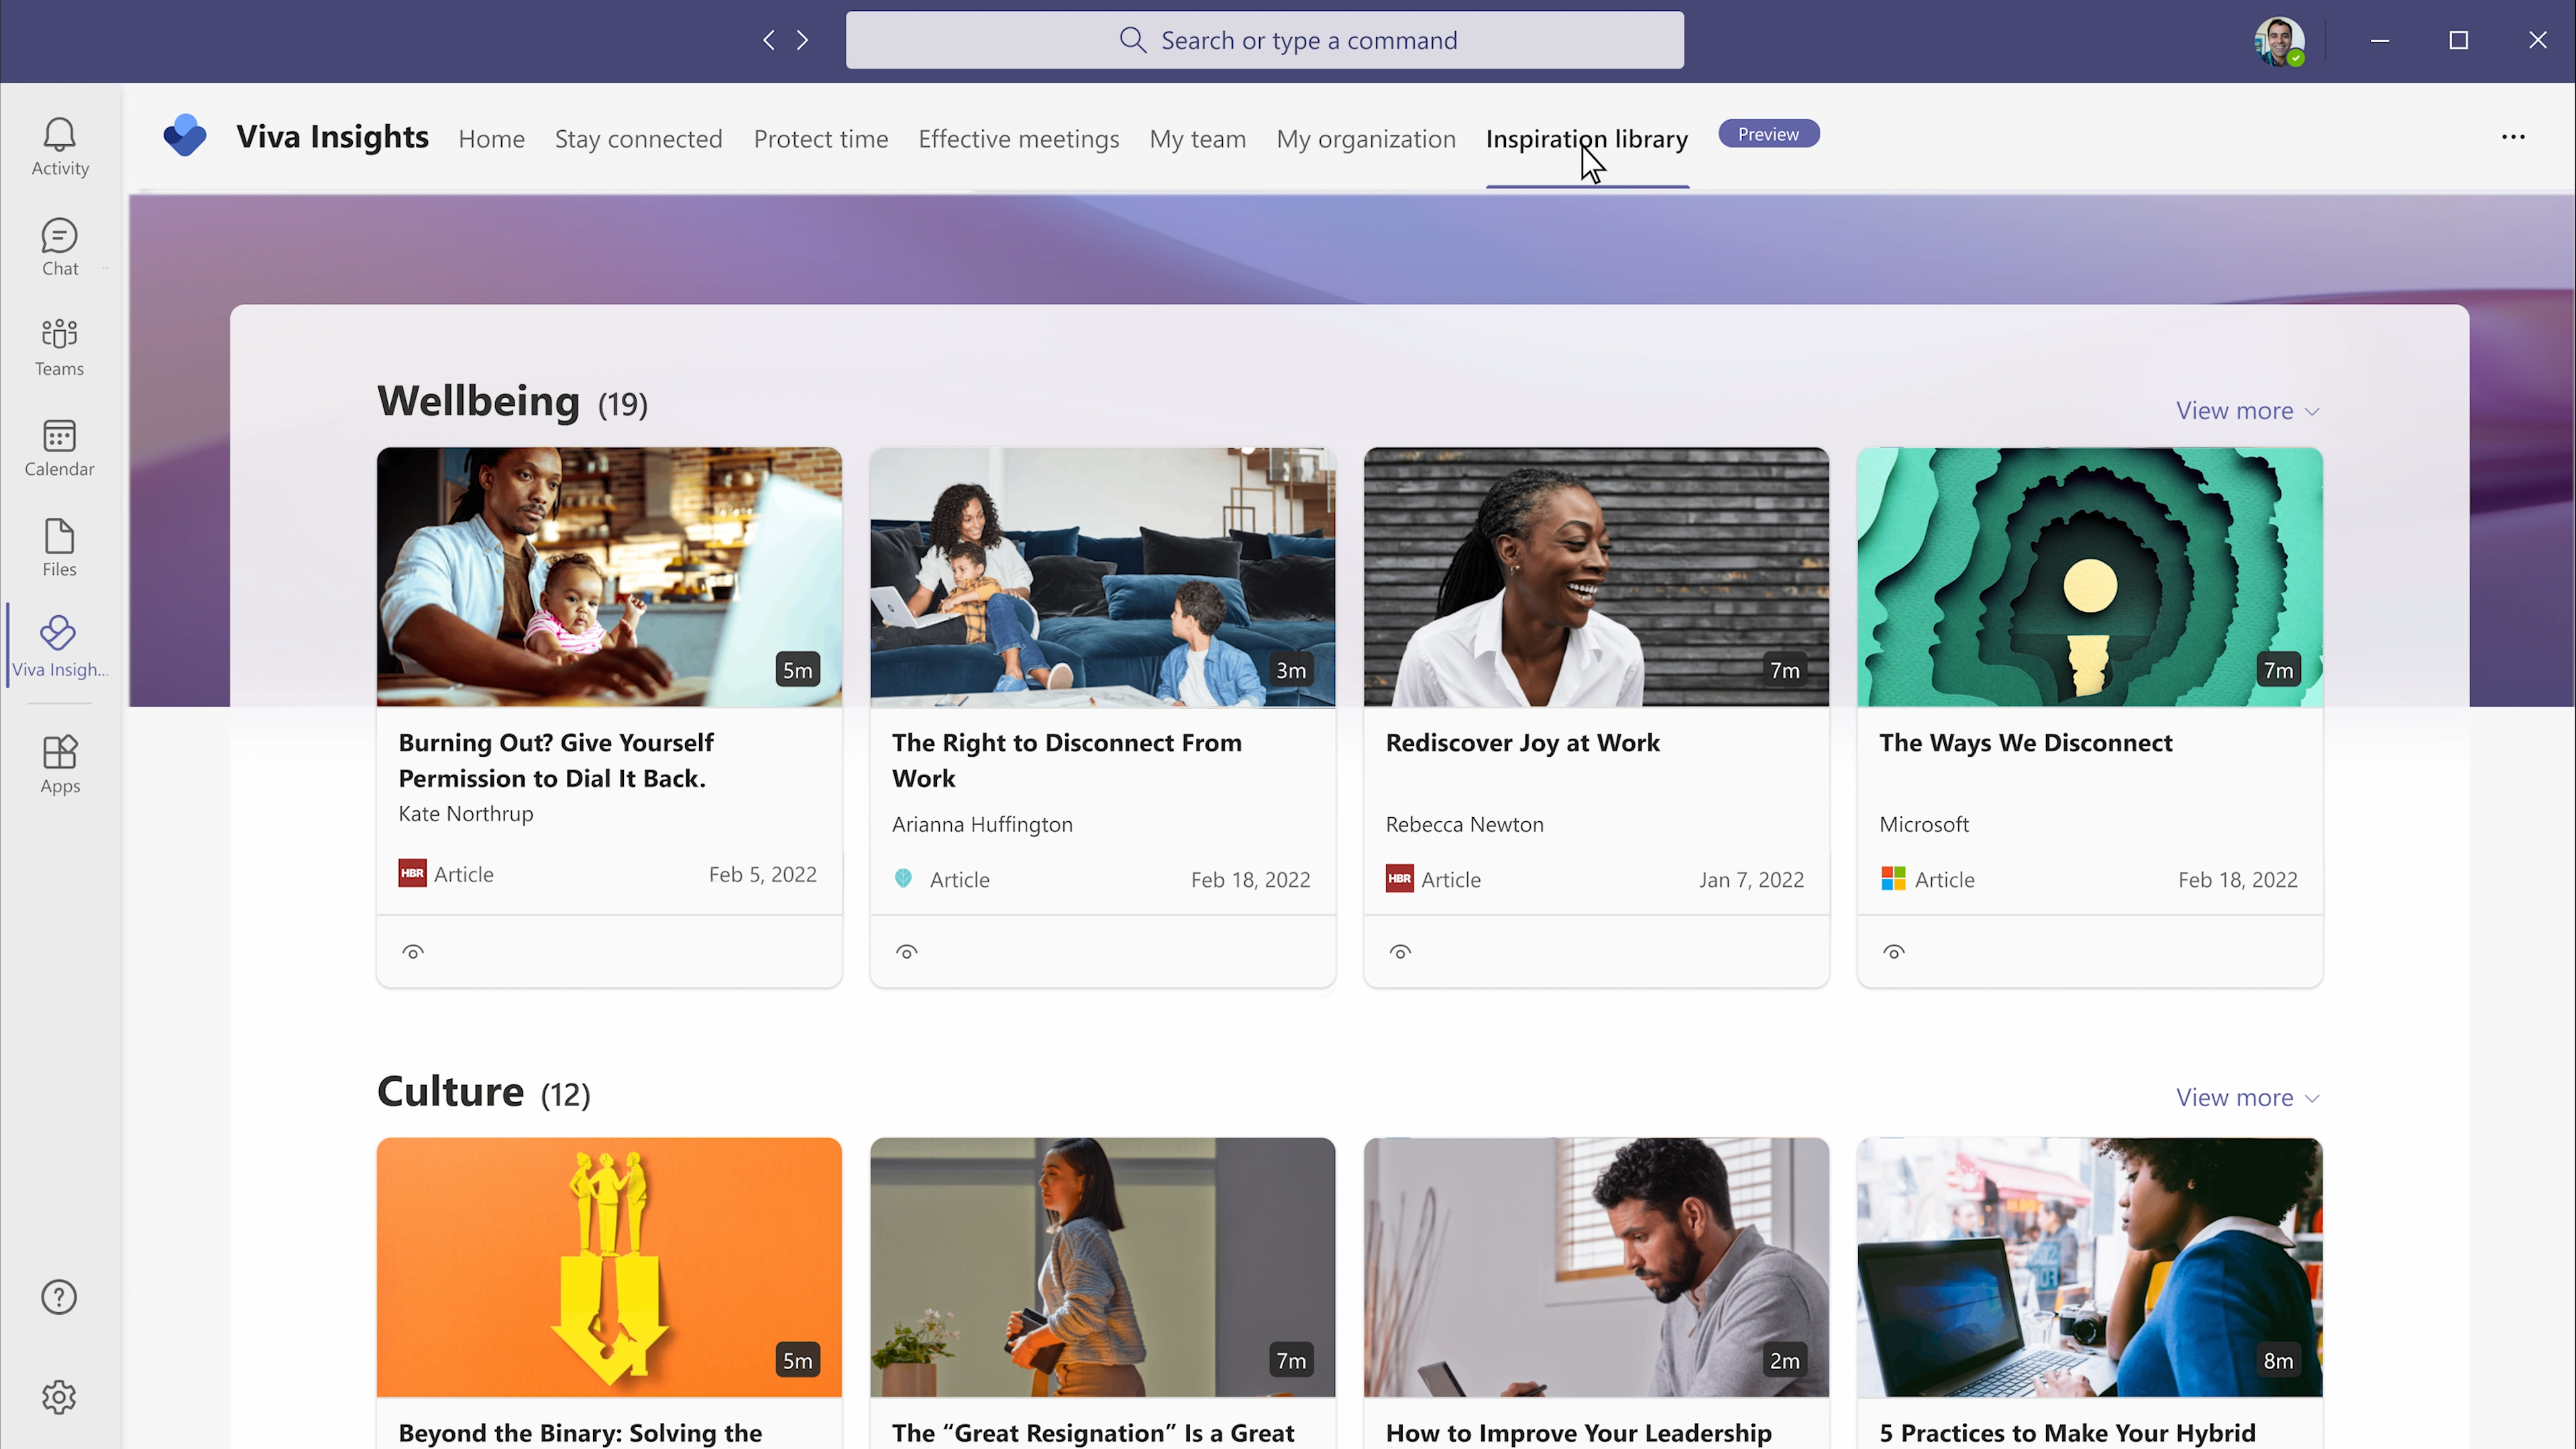 The Inspiration library, available in preview through the Viva Insights app in Teams, helps customers turn insights into action with access to thought leadership.